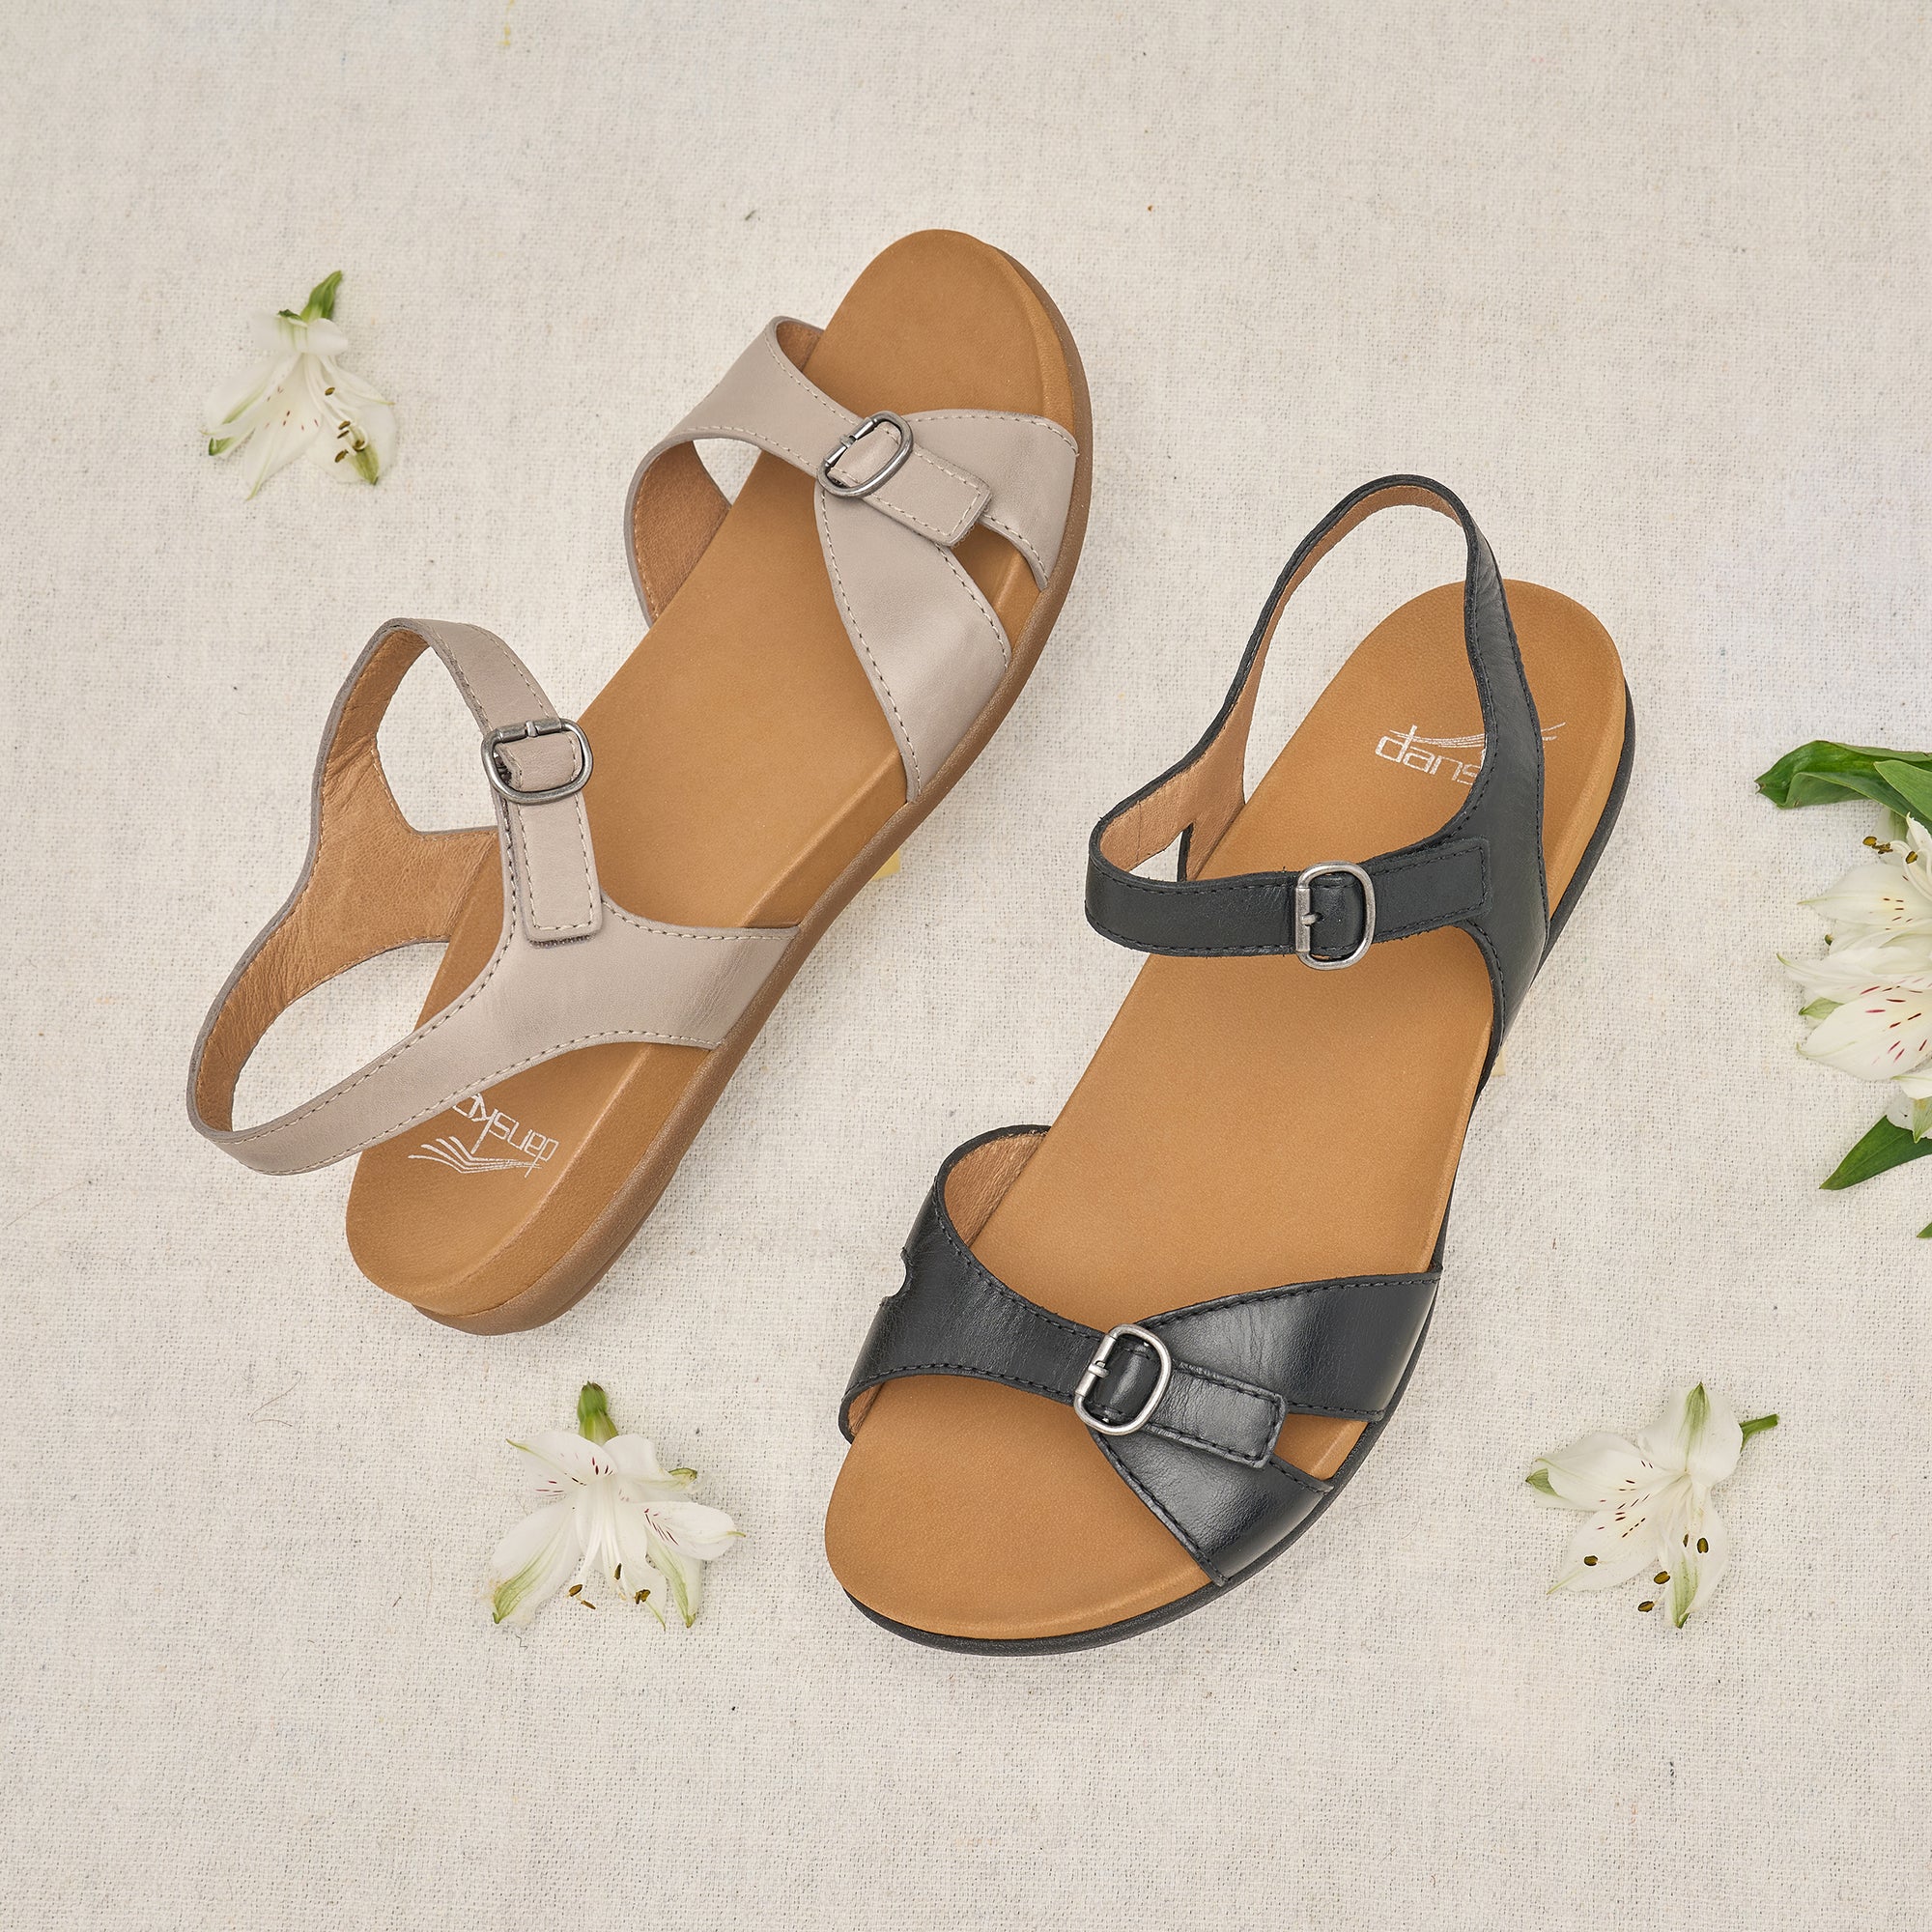 Two colors of a multi-strap flat sandal.